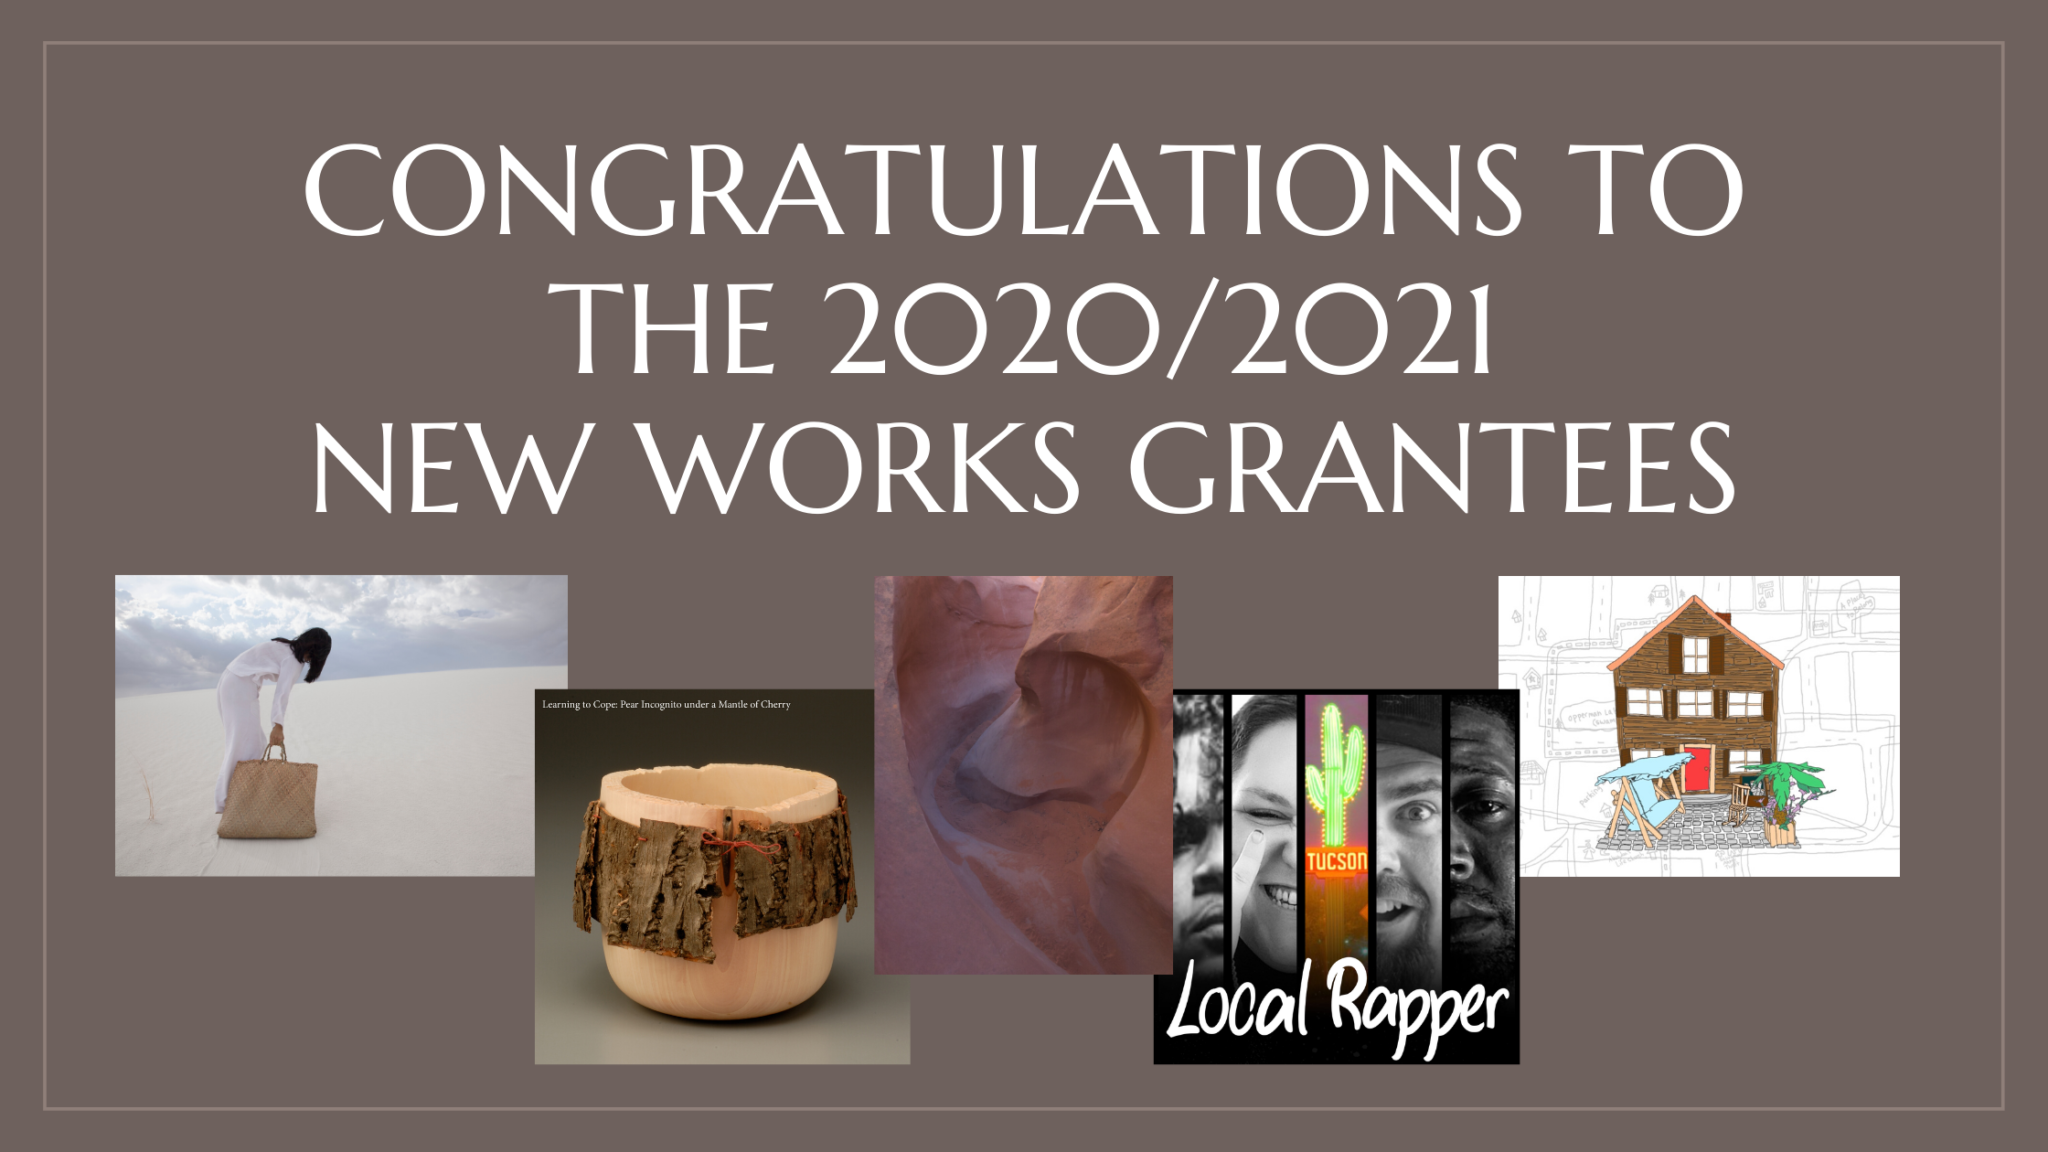 Congrats to the 2020/2021 New Works grantees!